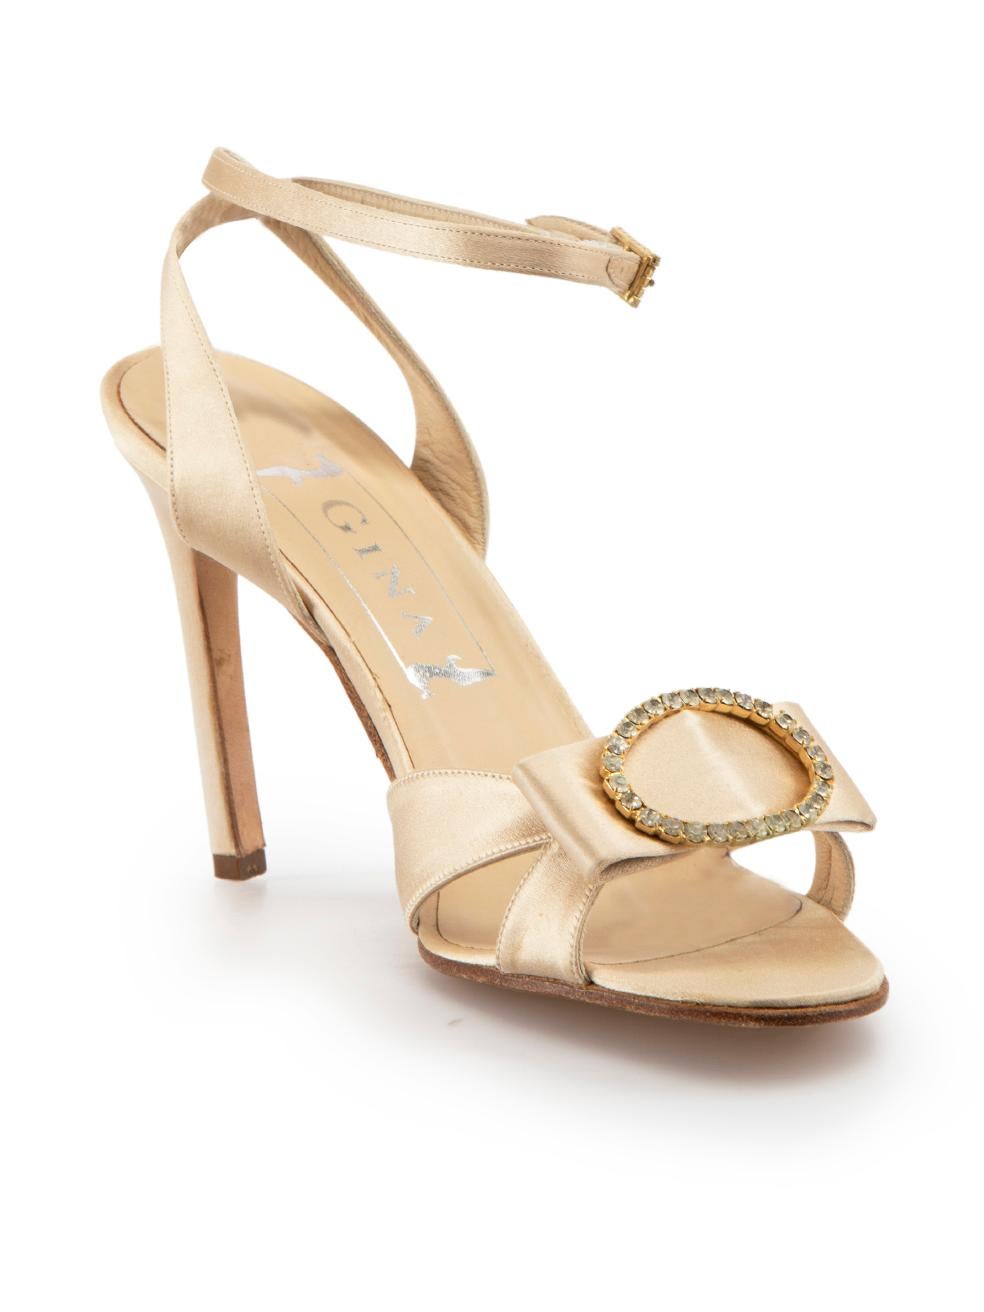 CONDITION is Very good. Minimal wear to sandals is evident. Minimal wear to the right-side toe strap of both shoes, as well as the heel of the left shoe and footbed of the right shoe with discoloured marks to the satin on this used Gina designer